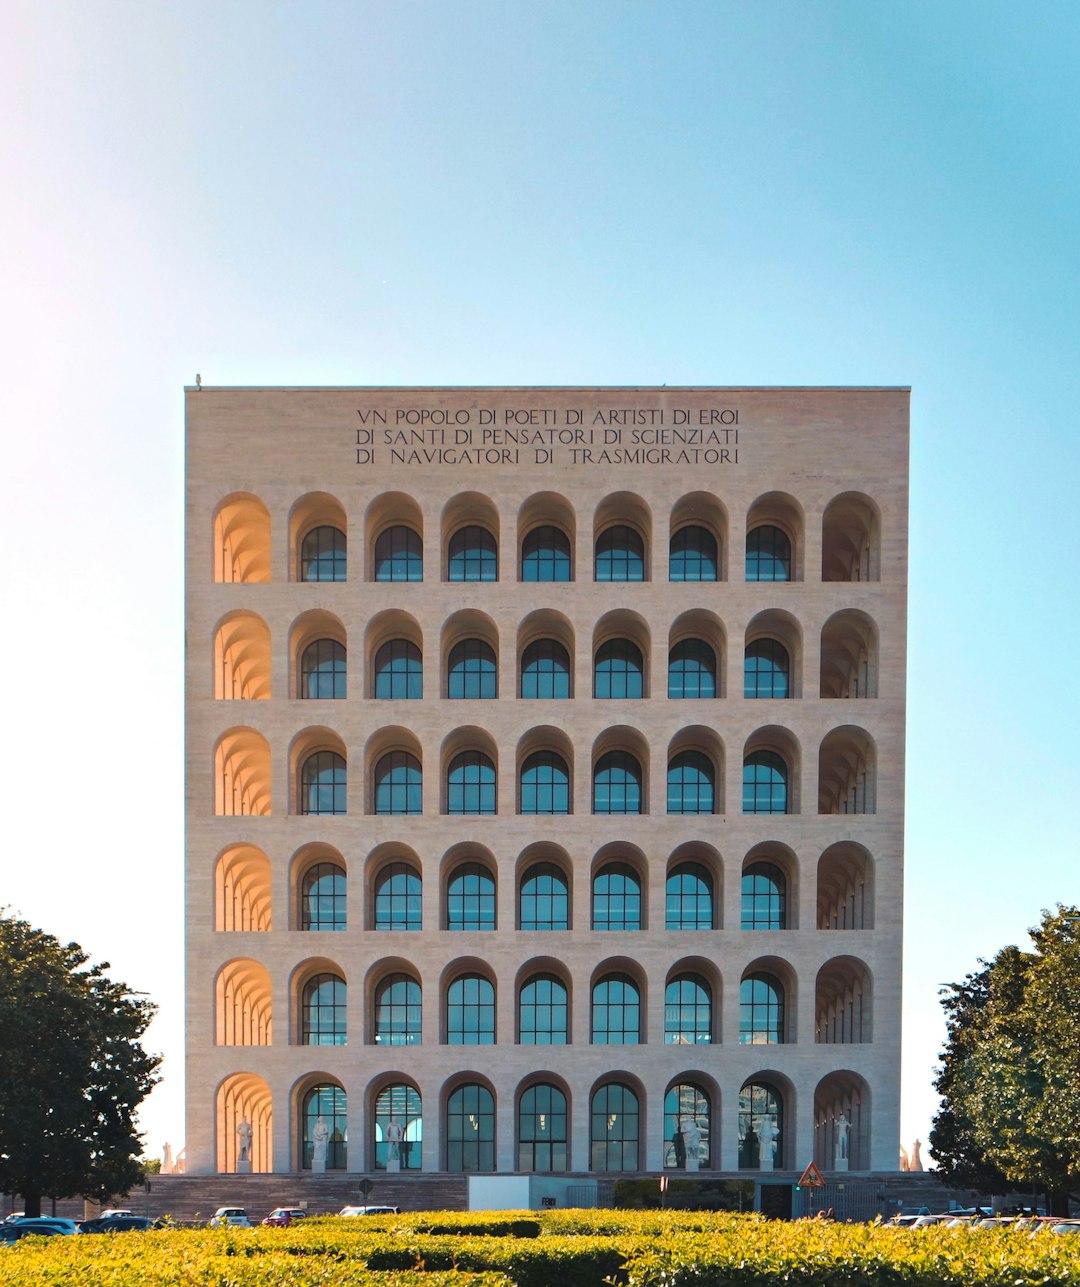 Roma Eur building during daytime by Michele Bitetto